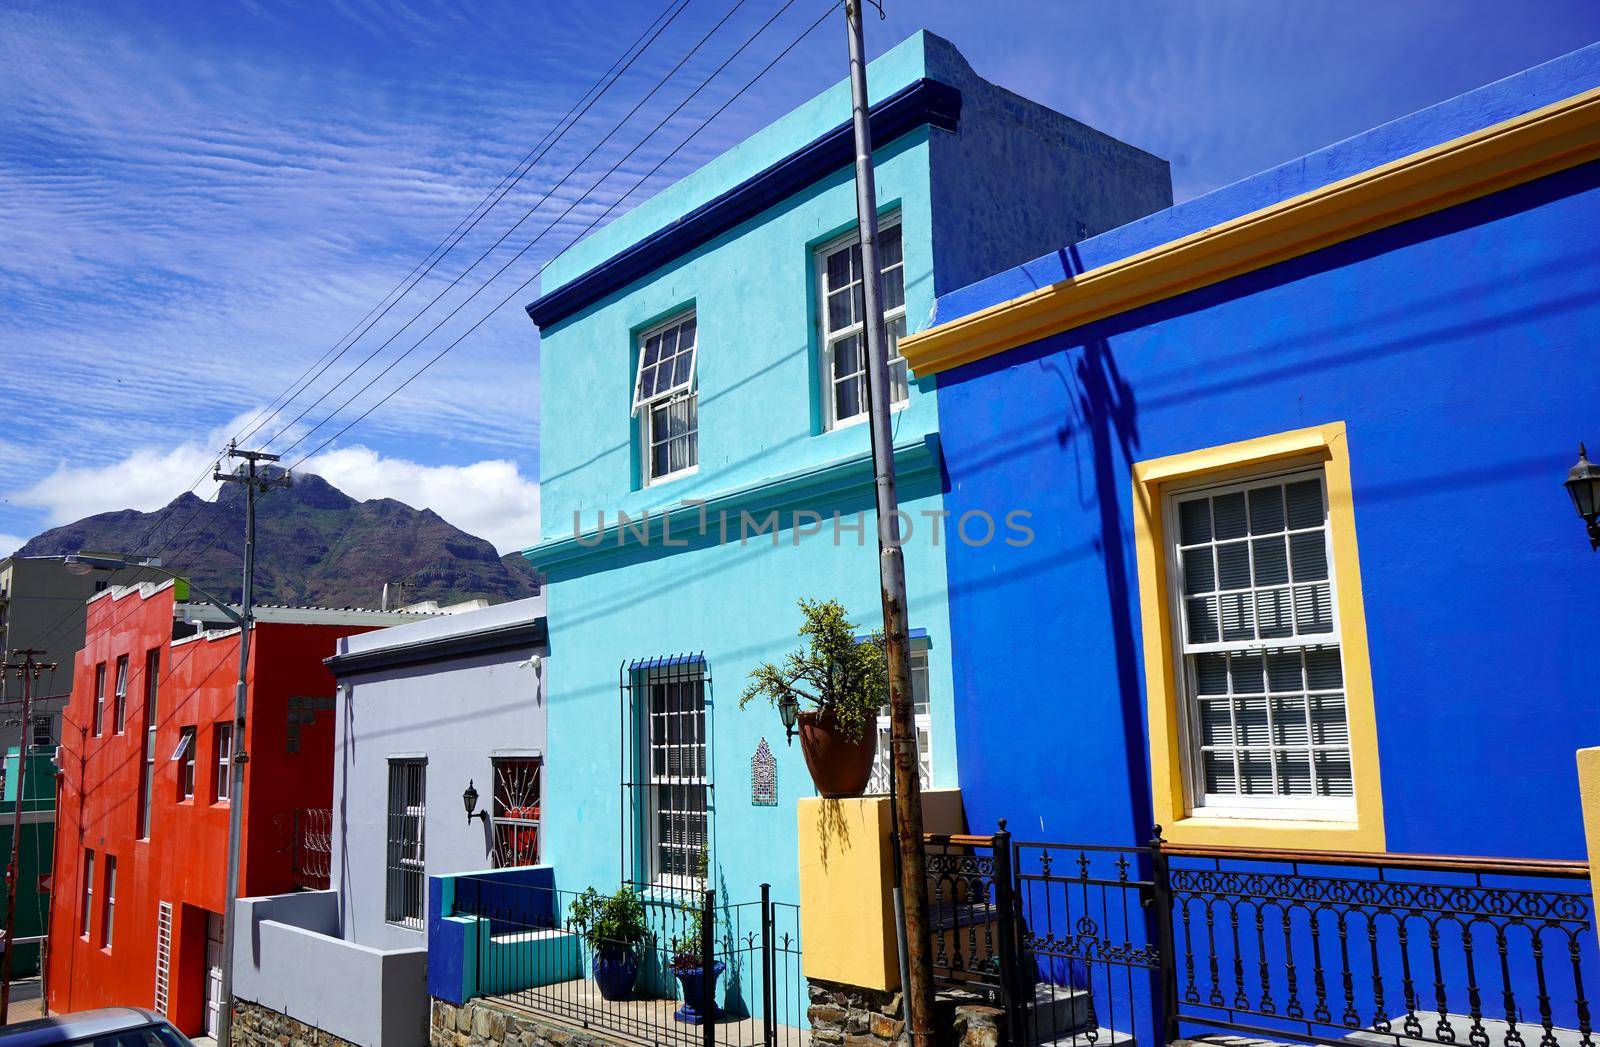  Bo-Kaap district, Cape Town, South Africa - 14 December 2021 : Distinctive bright houses in the bo-kaap district of Cape Town, South Africa